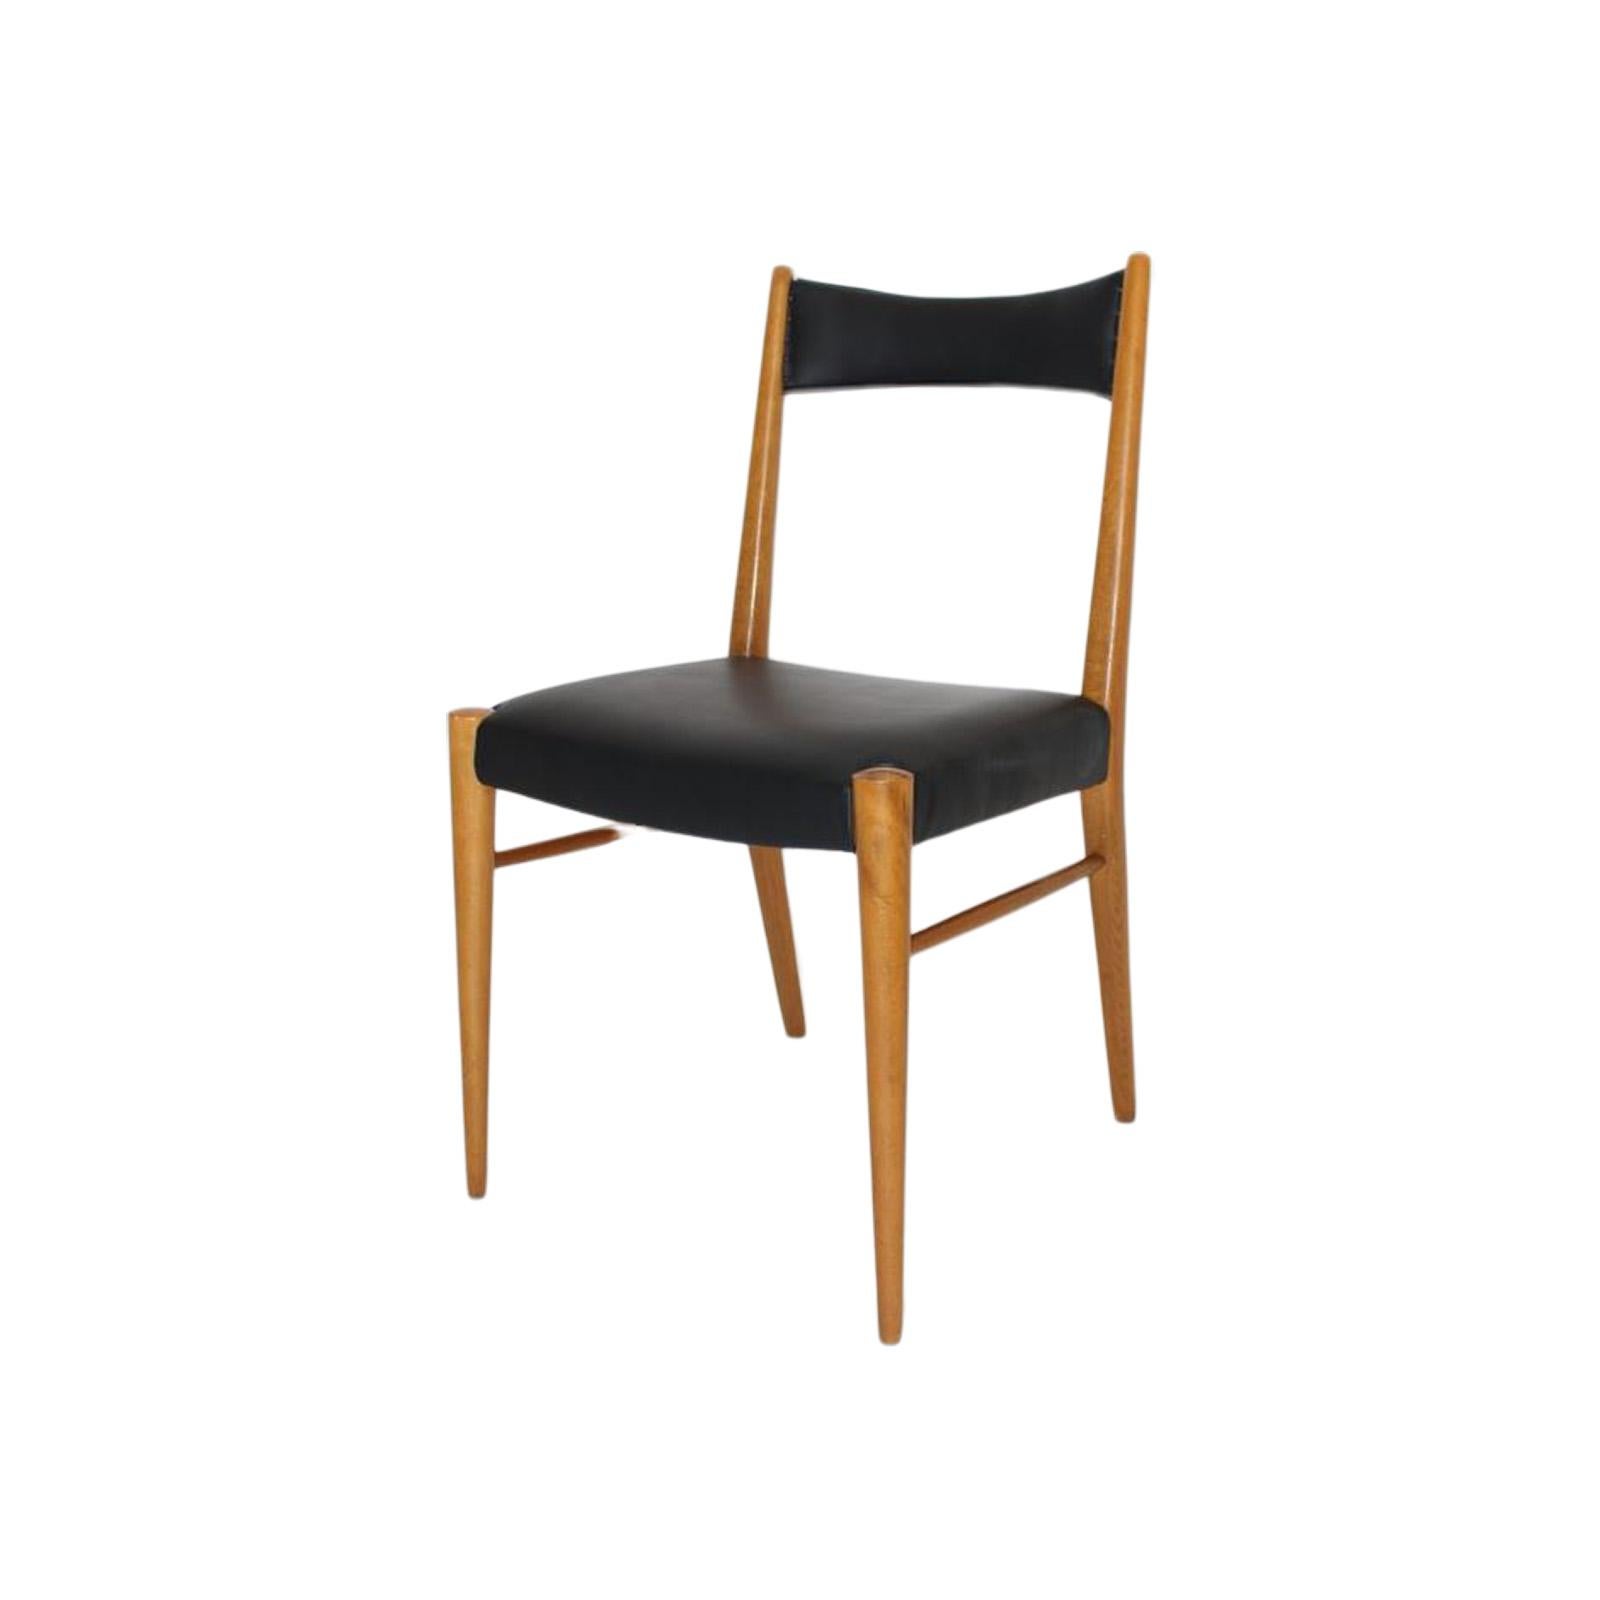 His set of four dining room chairs were designed by the Viennese architect Anna-Lülja Praun in 1953 and manufactured by Wiesner-Hager. The chair frame is made of beech and the upholstered seat and back are covered with black faux leather and